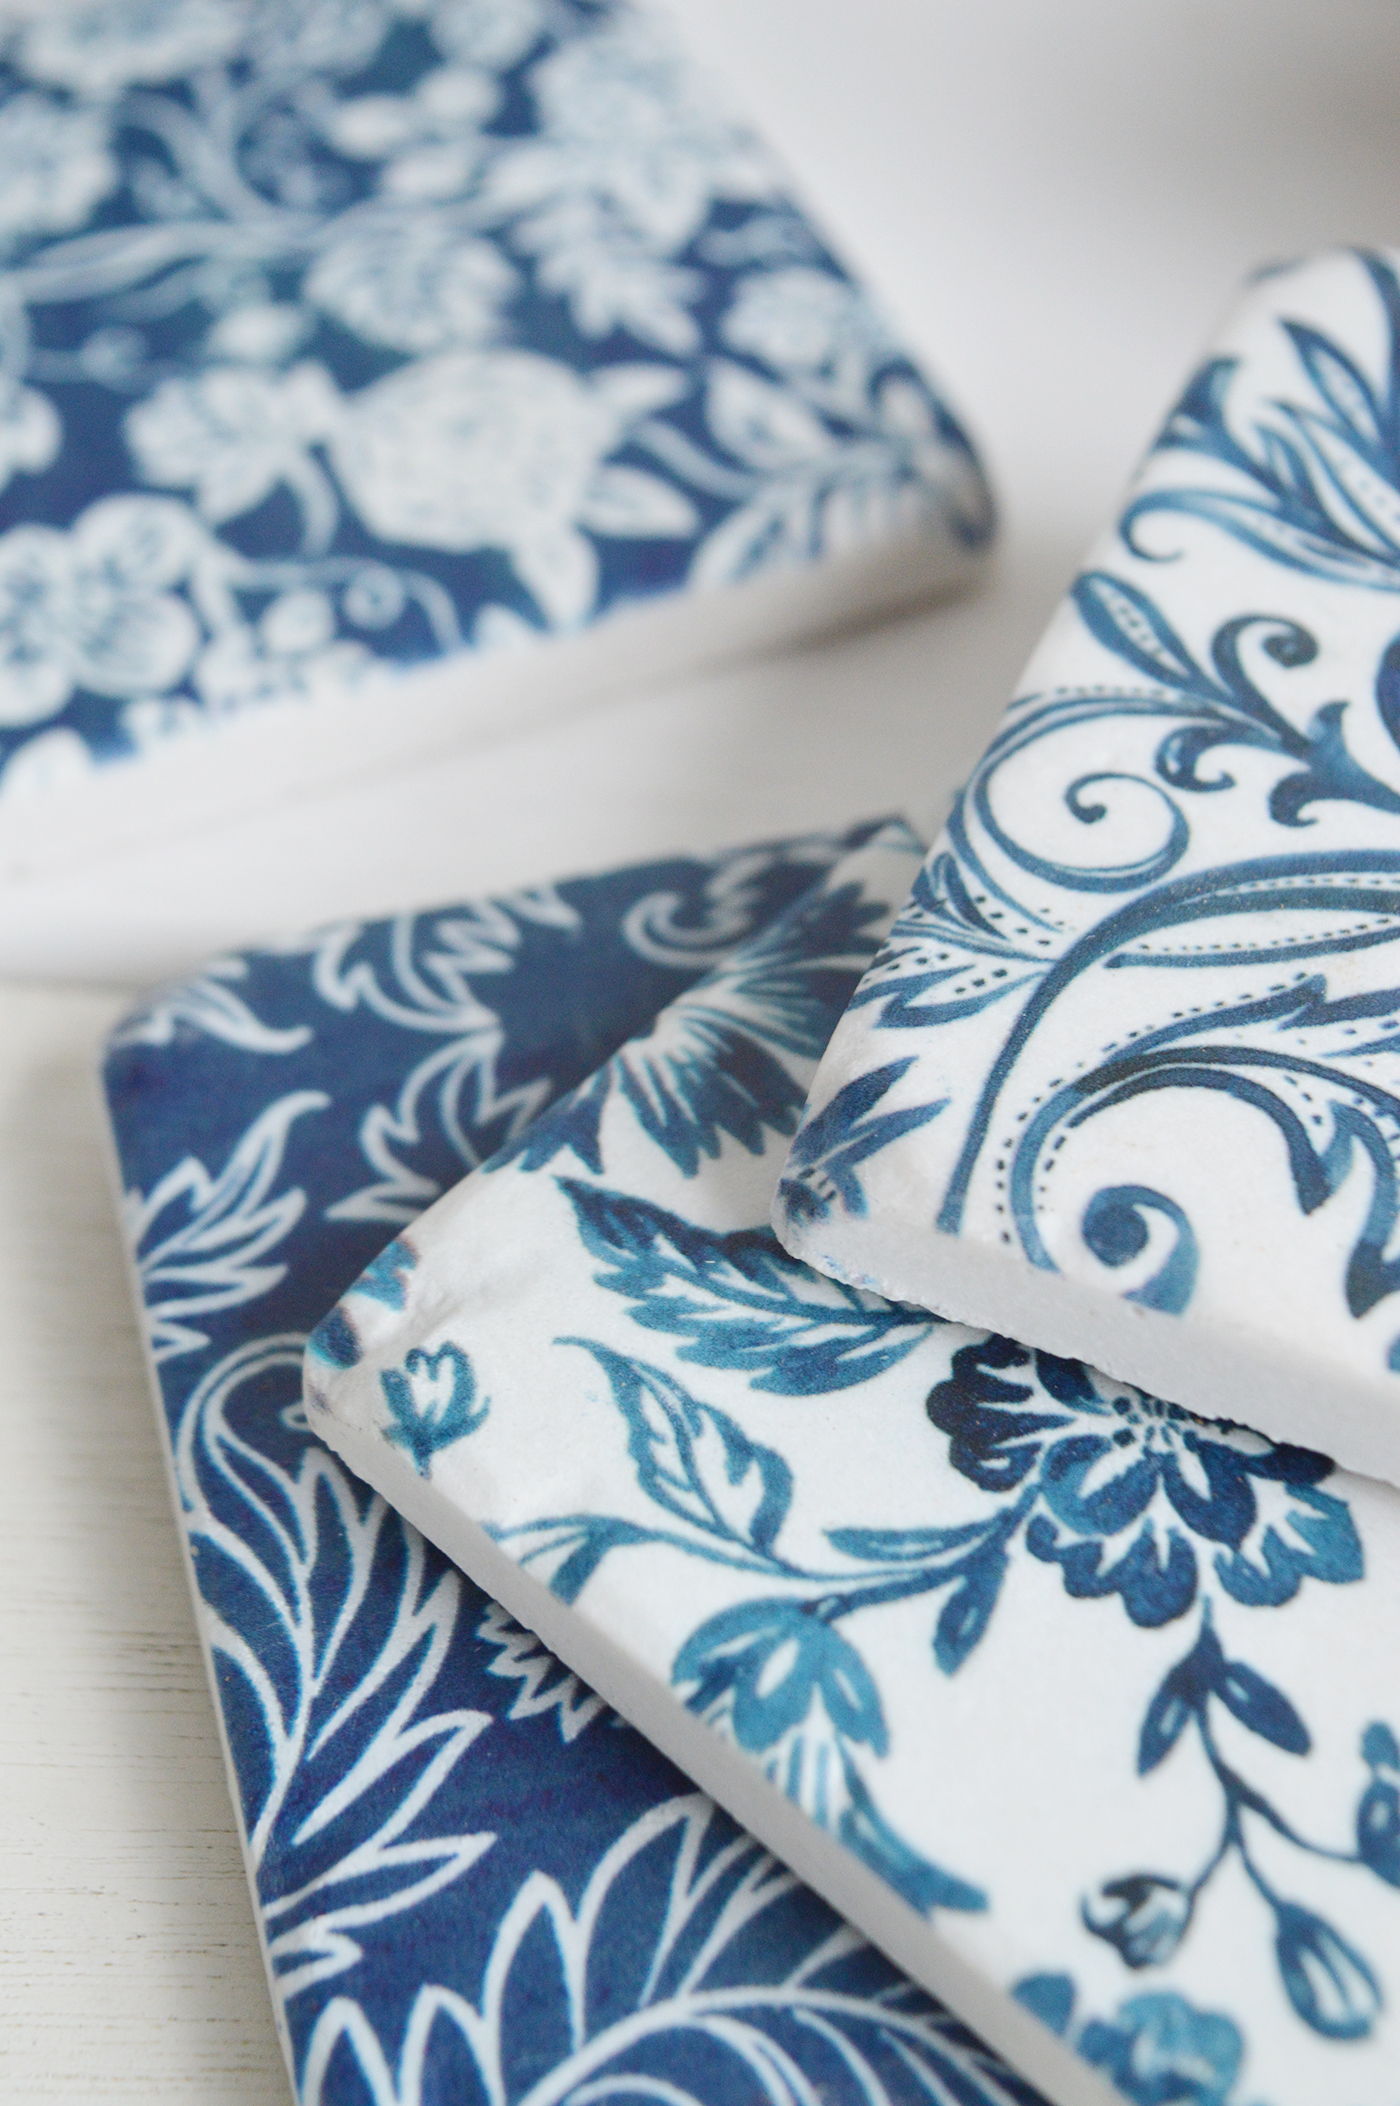 Blue and white floral coasters, perfect for both new England coastal and modern country and farmhouse homes and interiors